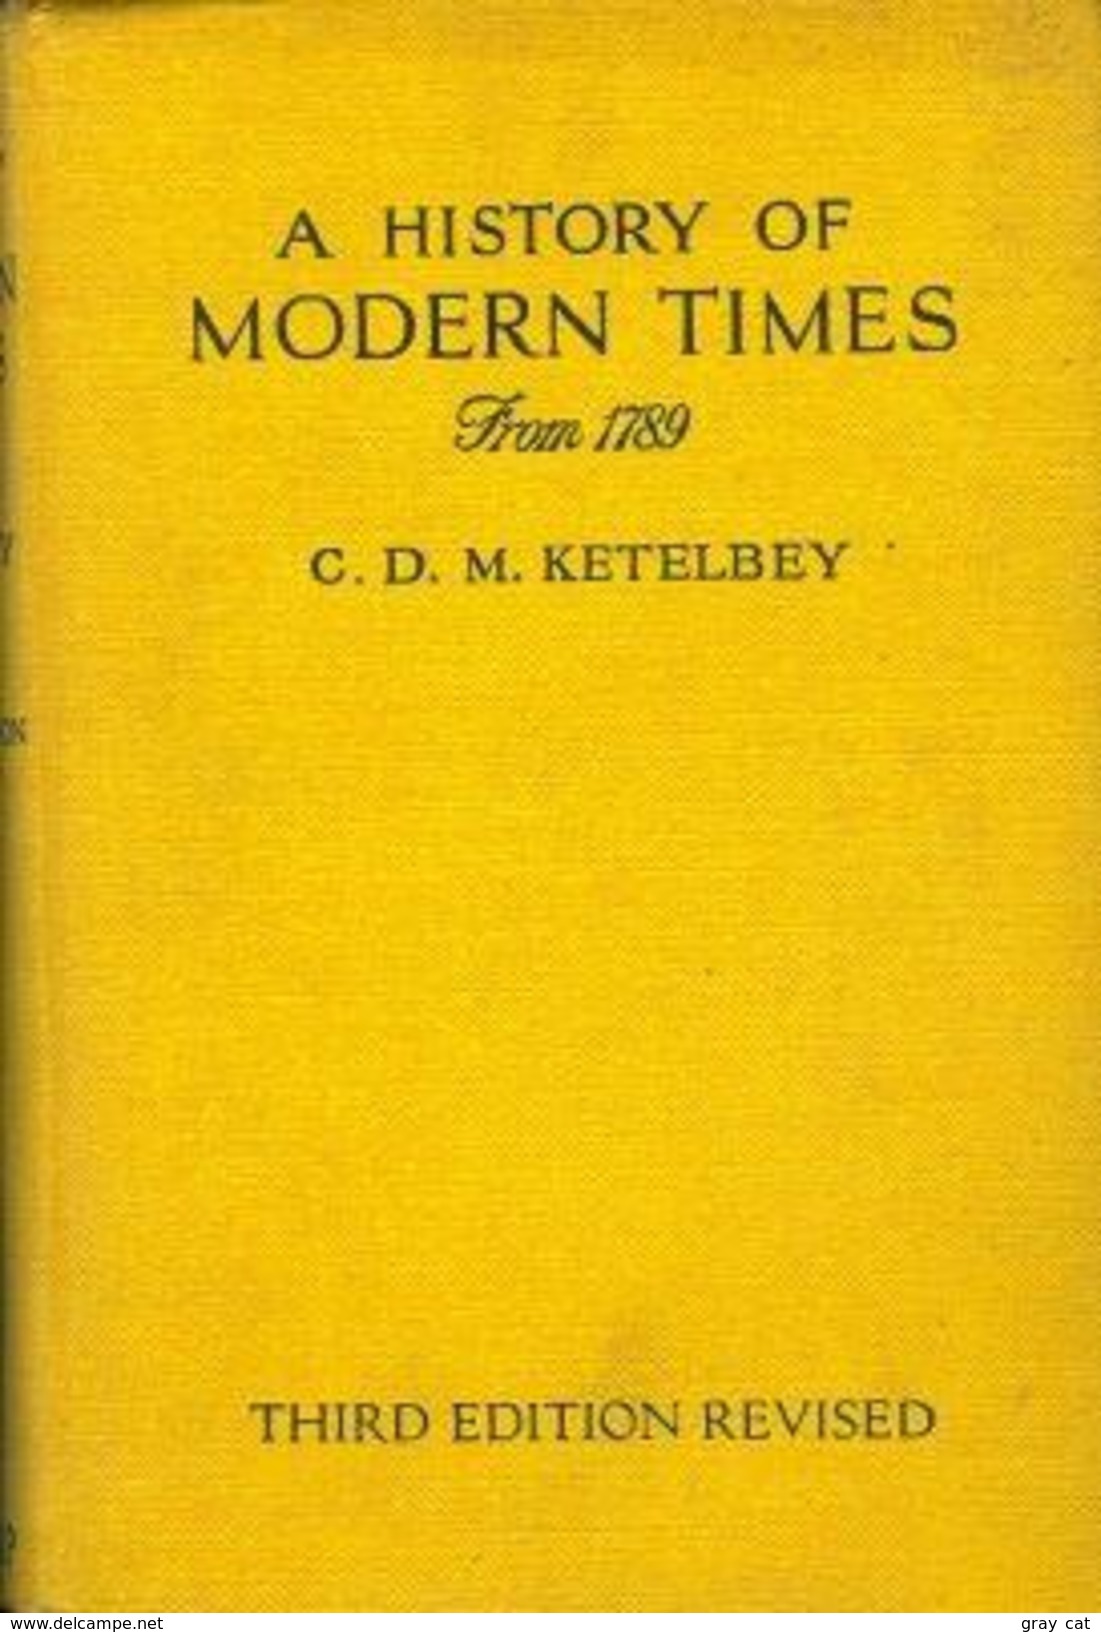 A History Of Modern Times From 1789 (Third Edition) By C. D. M. Ketelbey - Welt